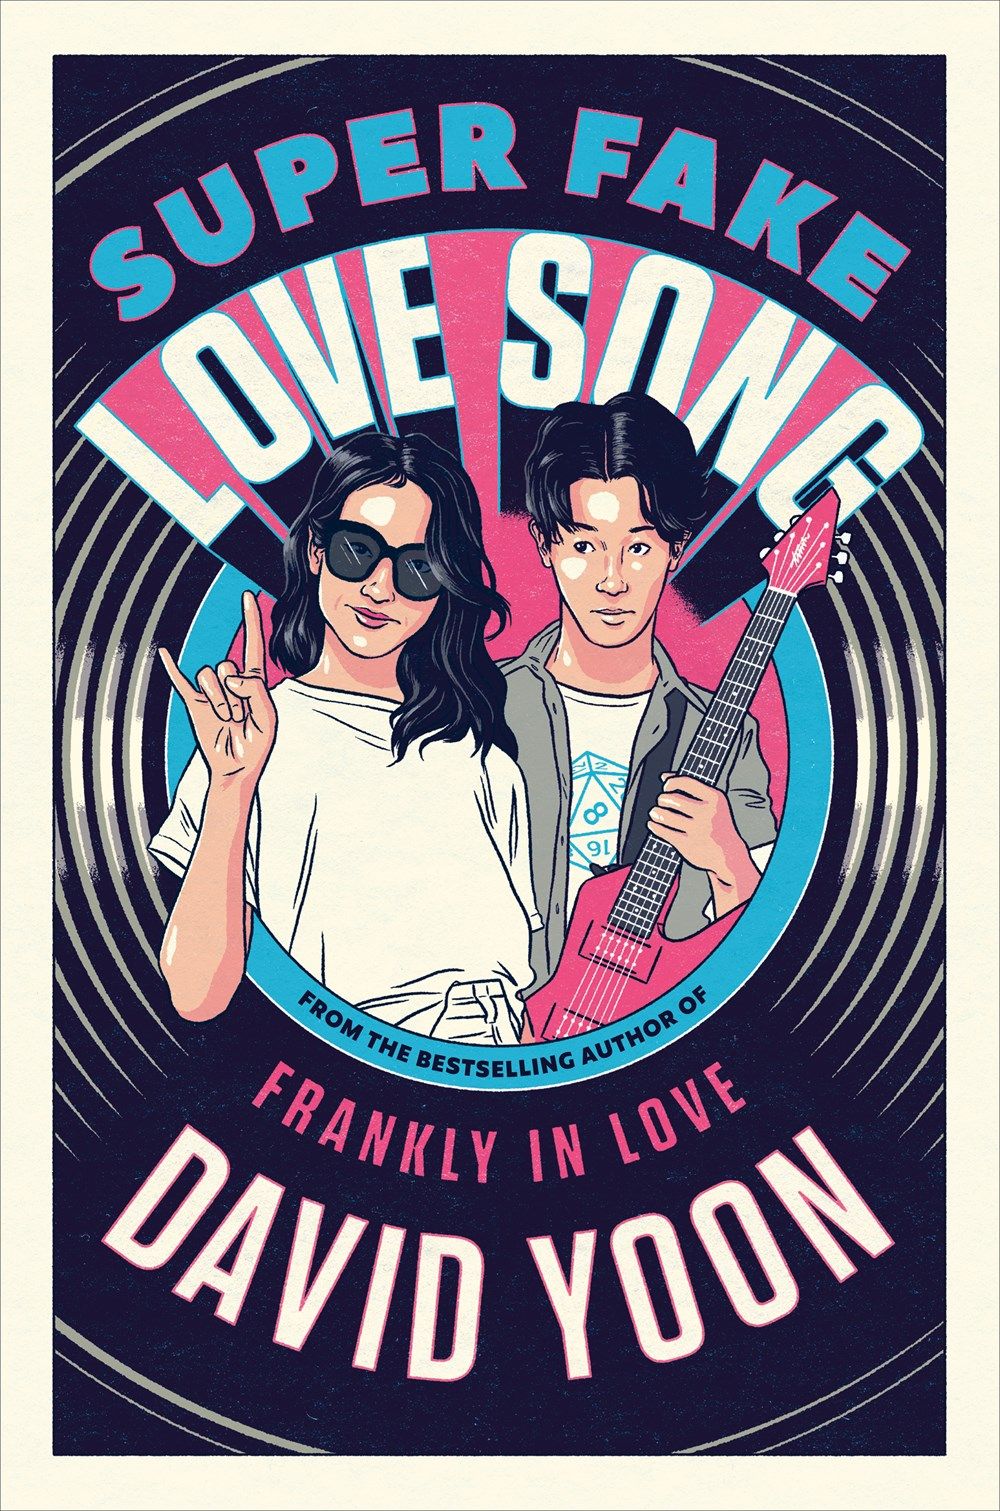 Super Fake Love Song book cover